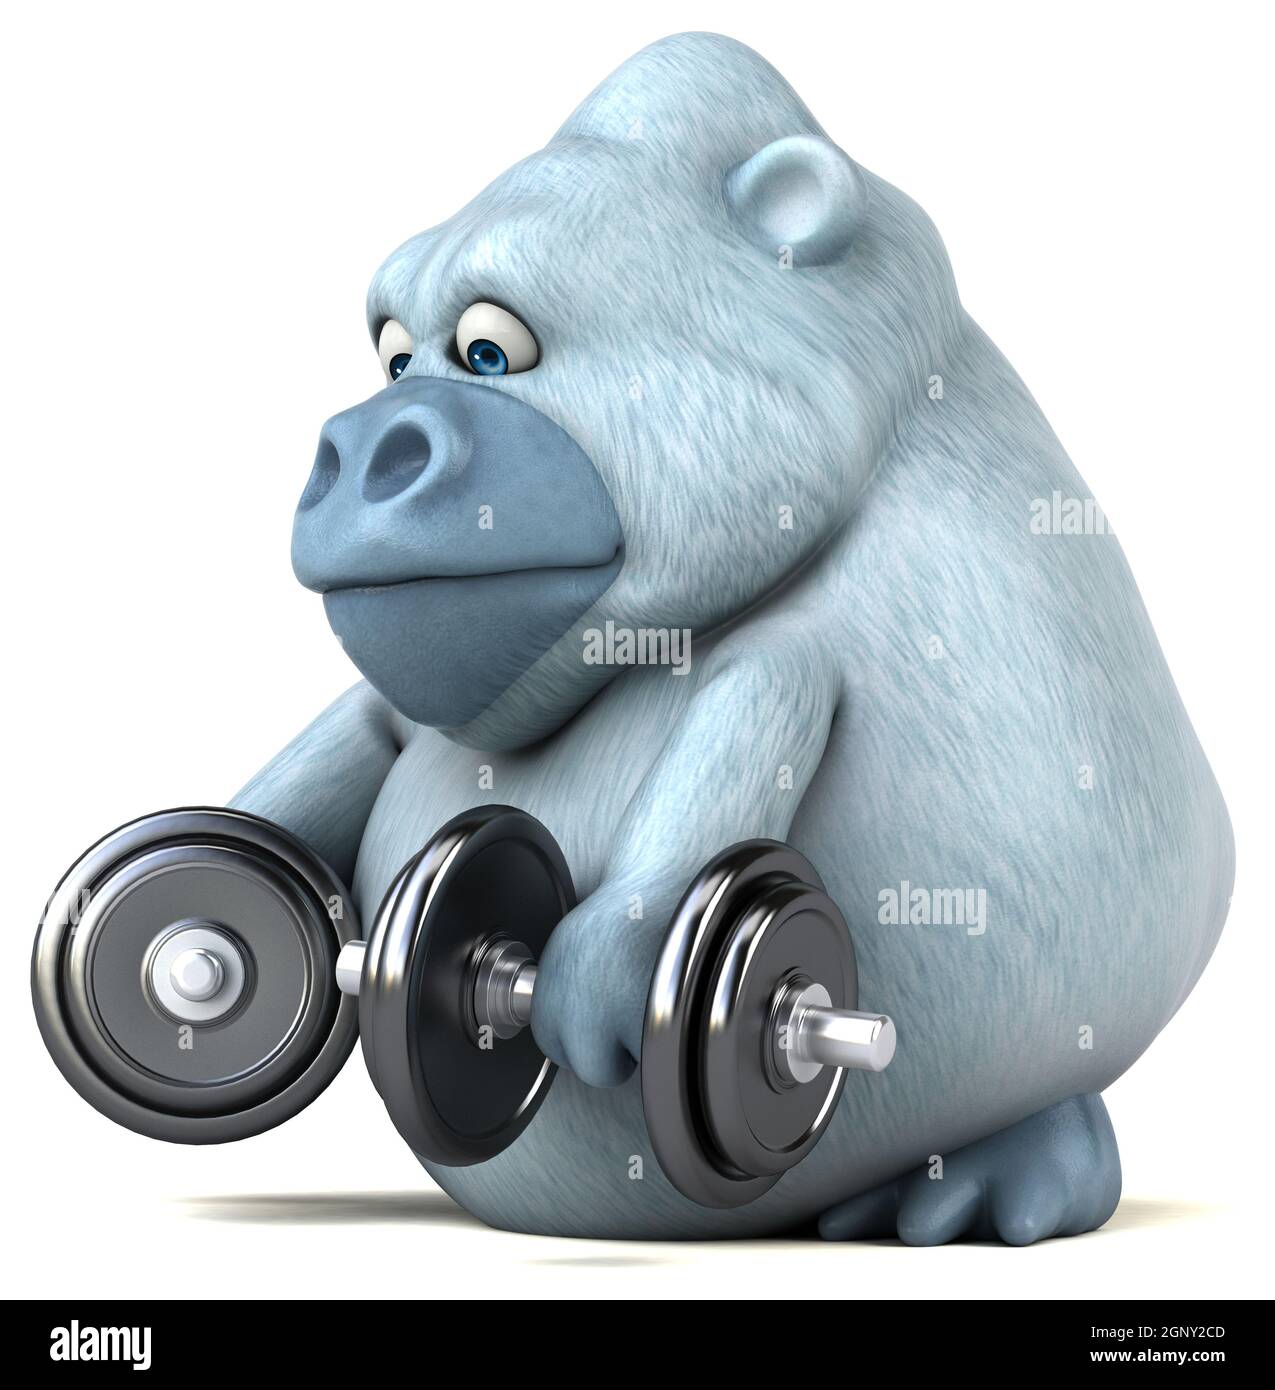 Gorilla Gym Stock Photos and Pictures - 1,005 Images